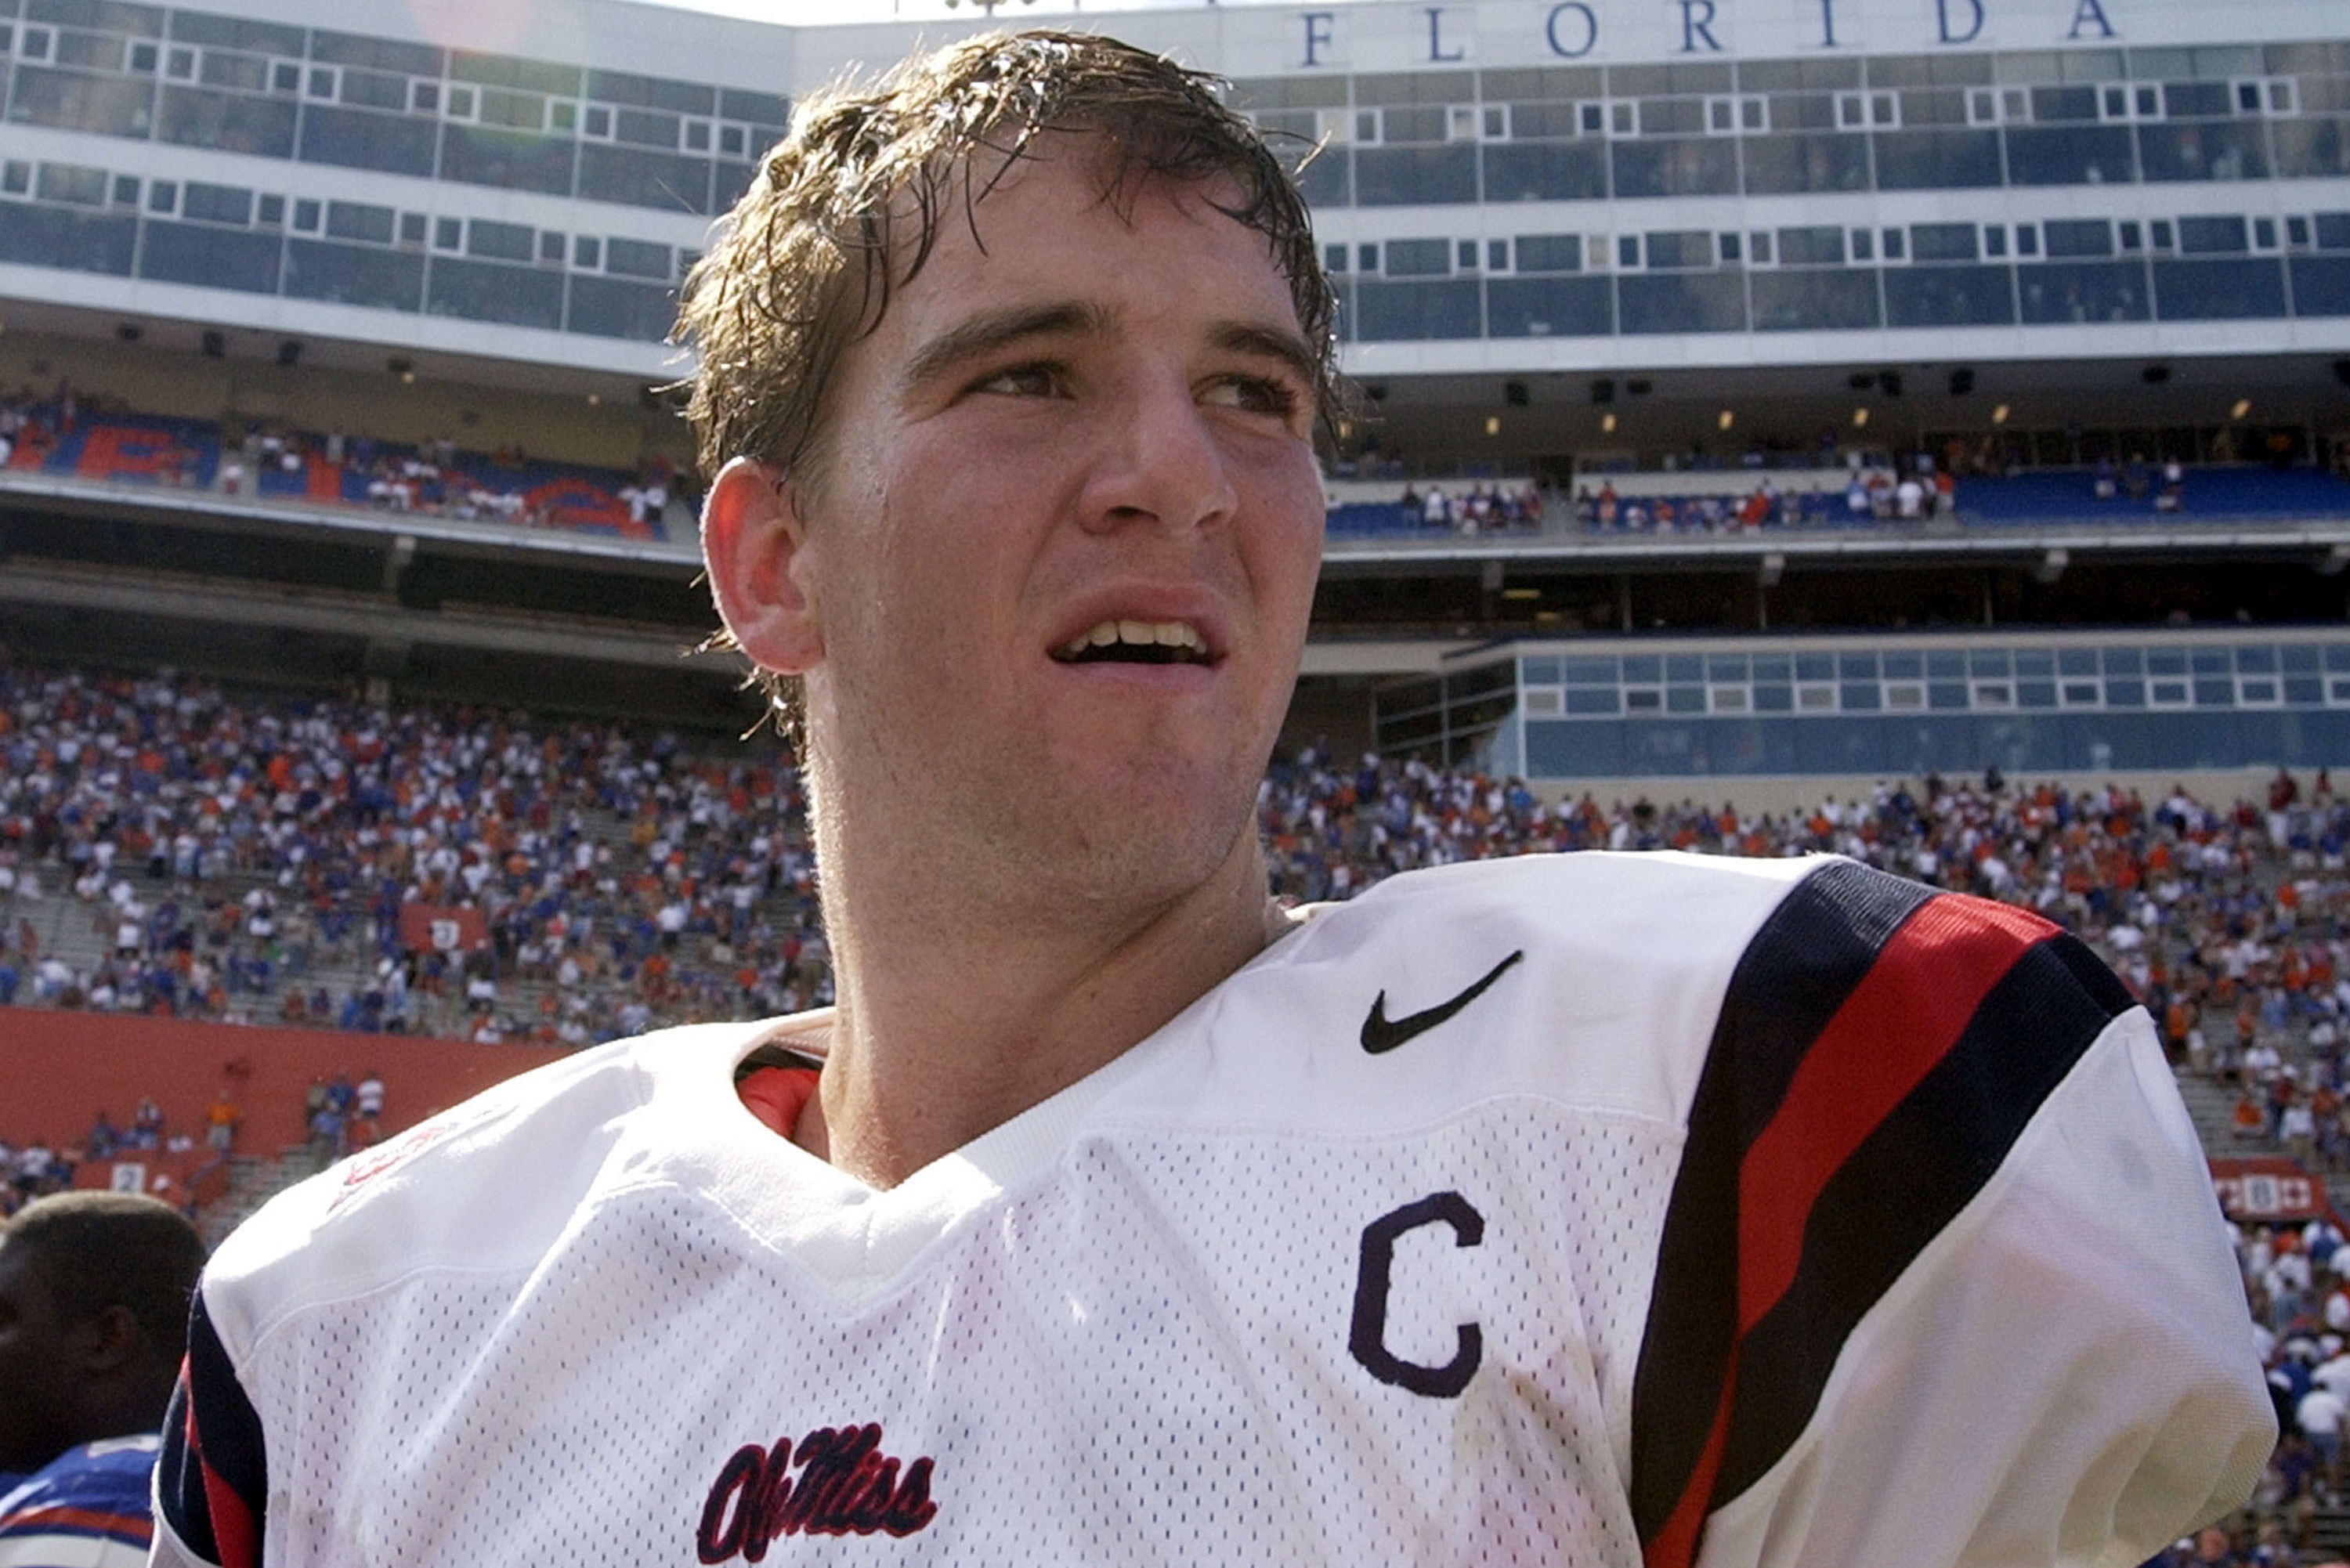 Football to Retire Eli Manning's Jersey Number - Ole Miss Athletics